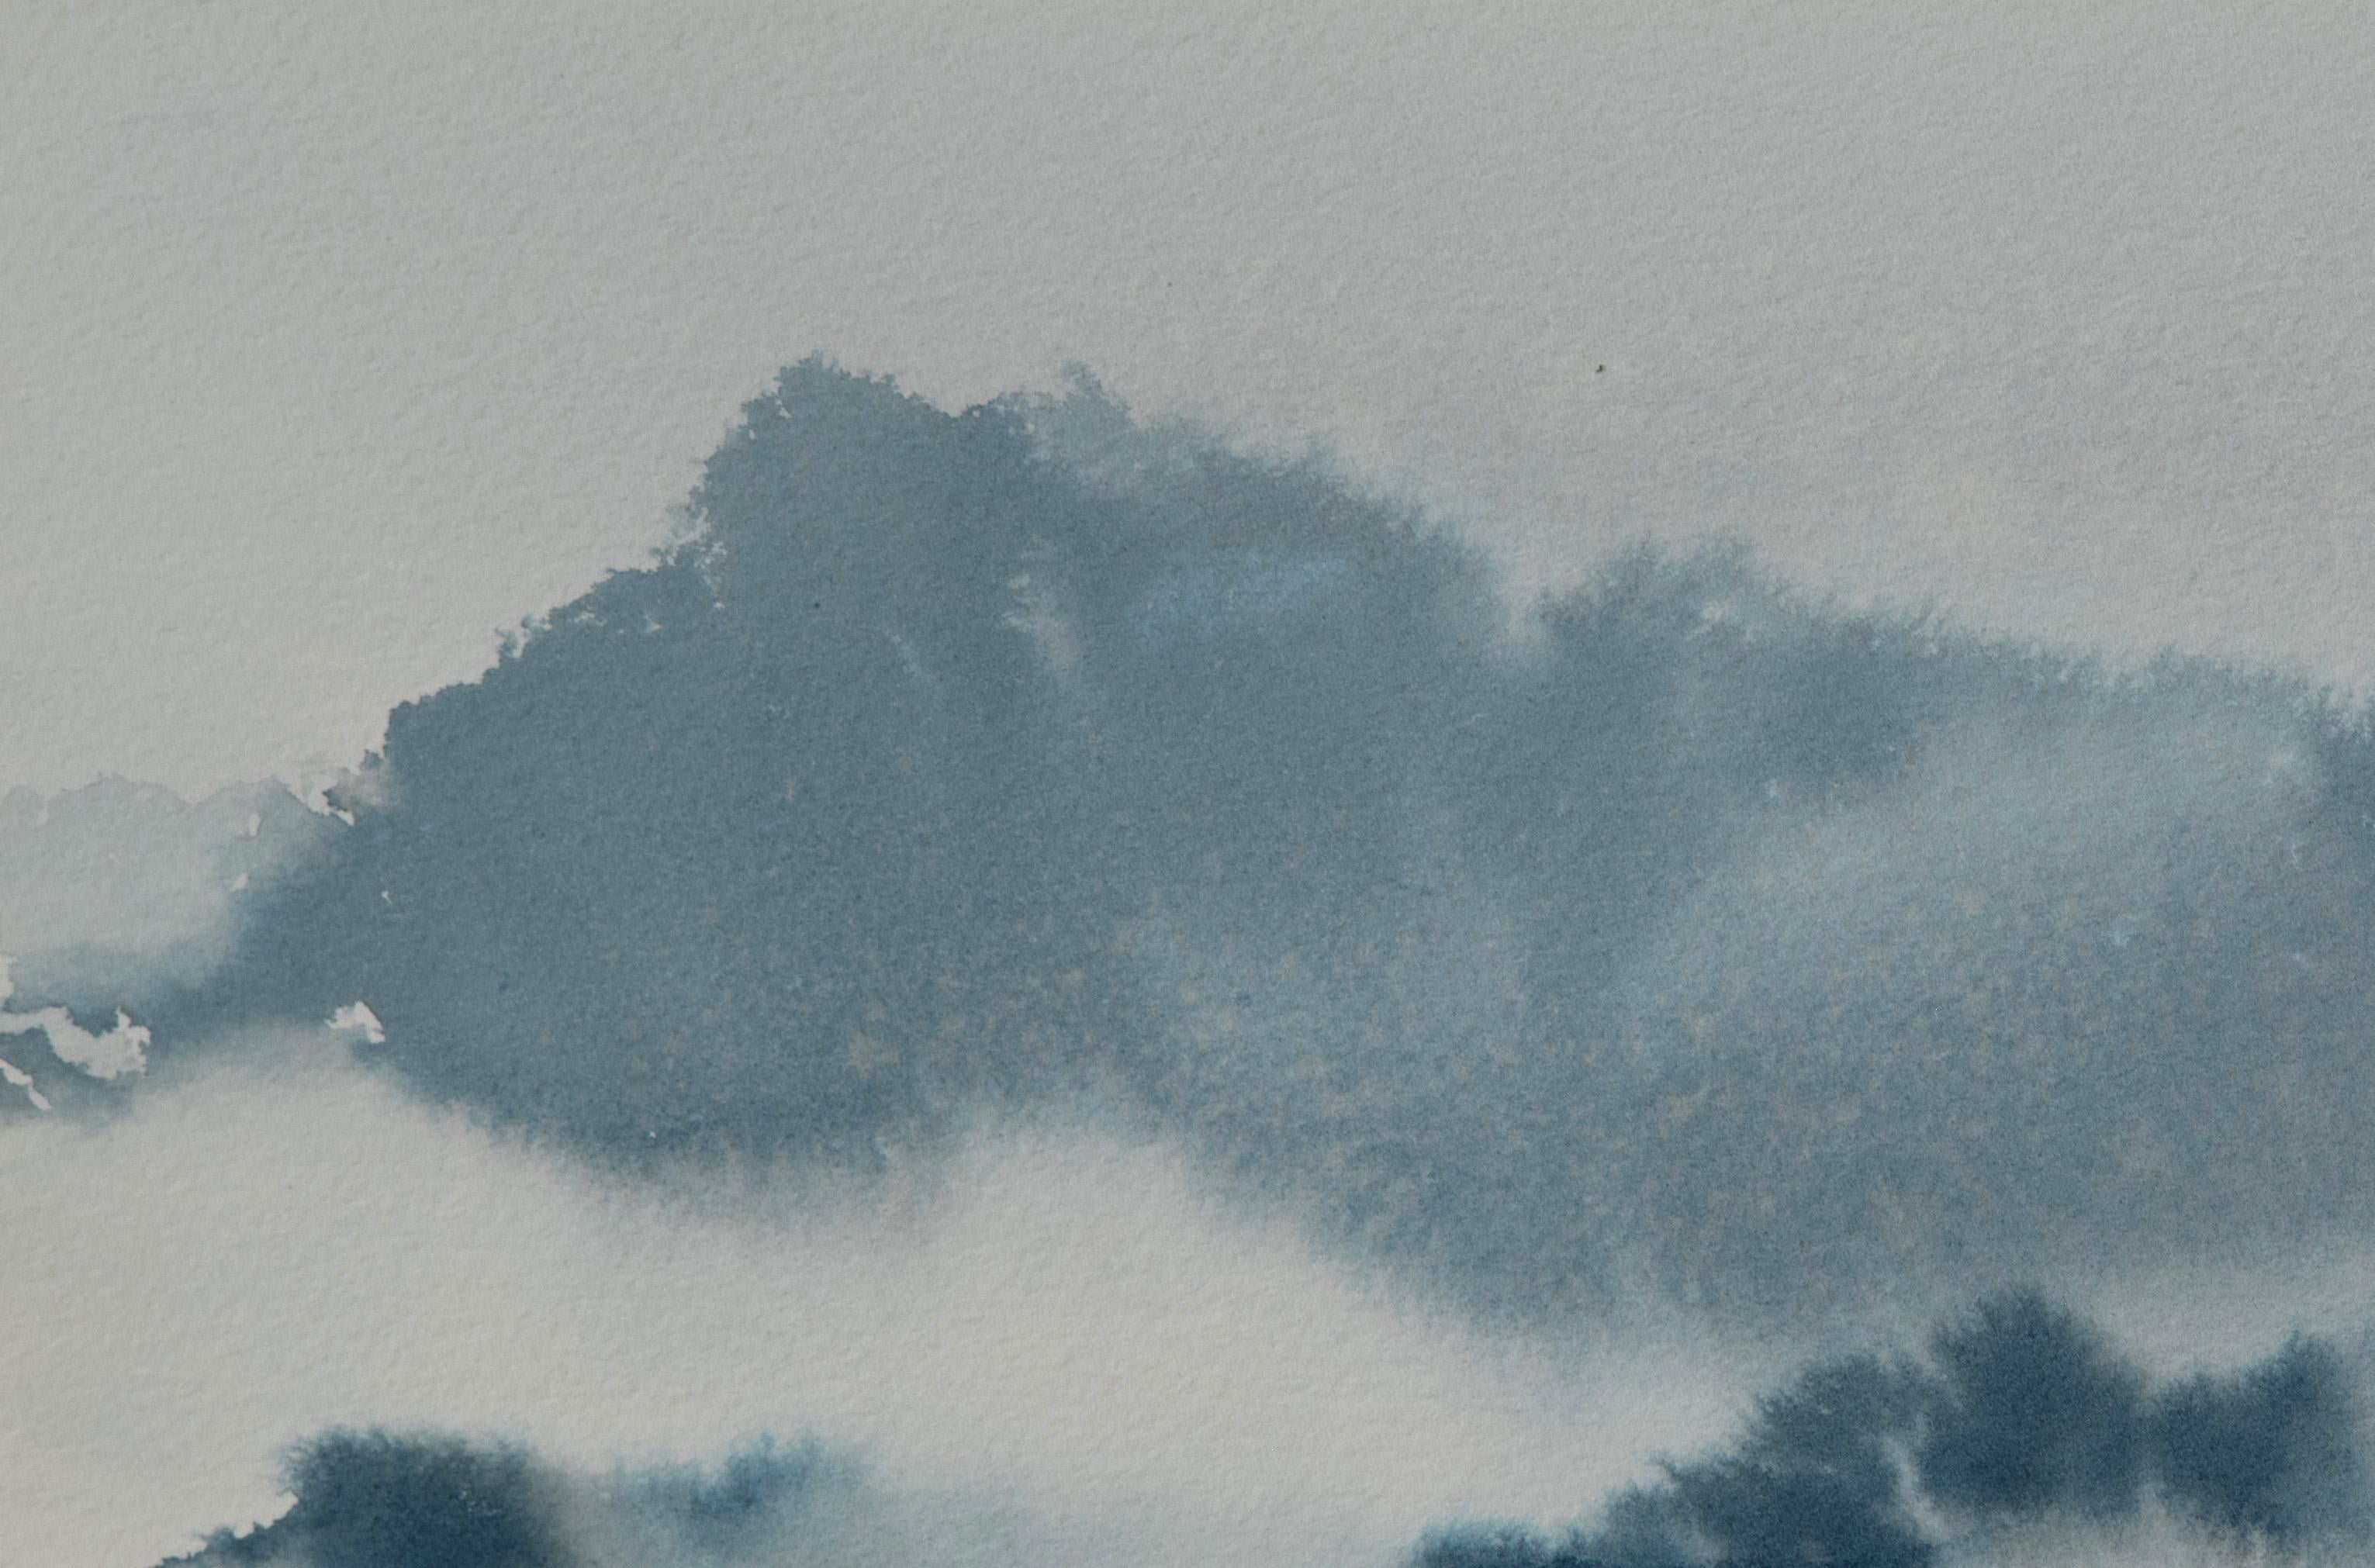 <p>Artist Comments<br>A breathtaking panorama of mountains emerges from the mist in artist Siyuan Ma's piece. The abstract imagery takes the viewer into a dreamlike world of soft meandering colors. Continuous mountain ranges linger in the sky with